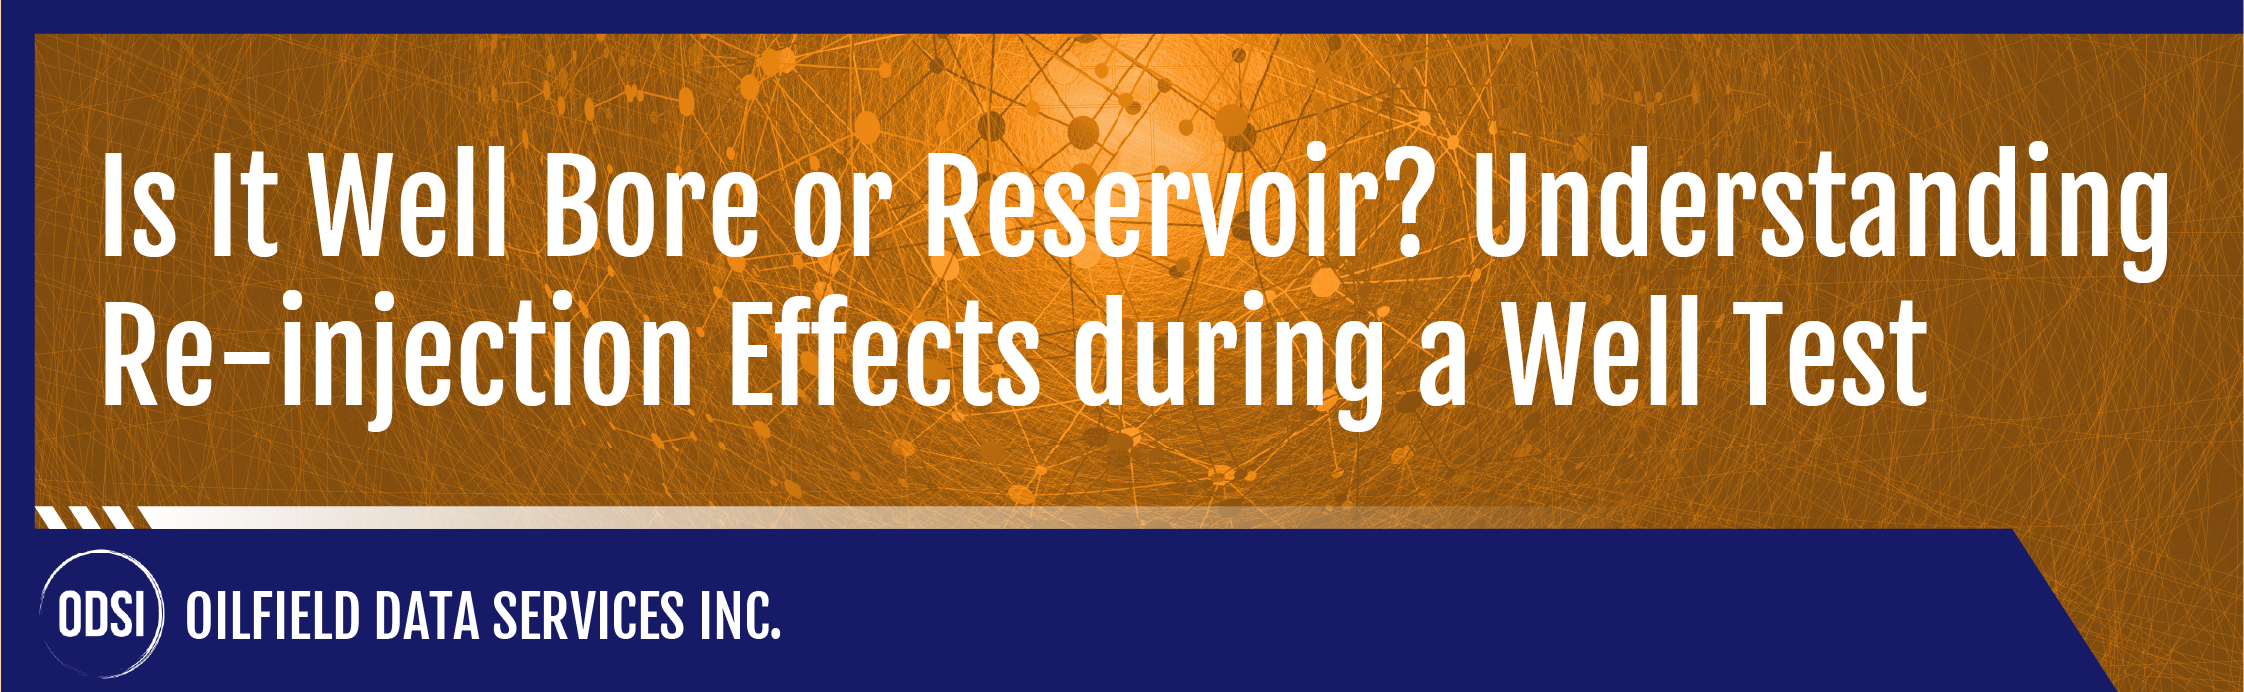 Is It Well Bore or Reservoir Understanding Re-injection Effects during a Well Test